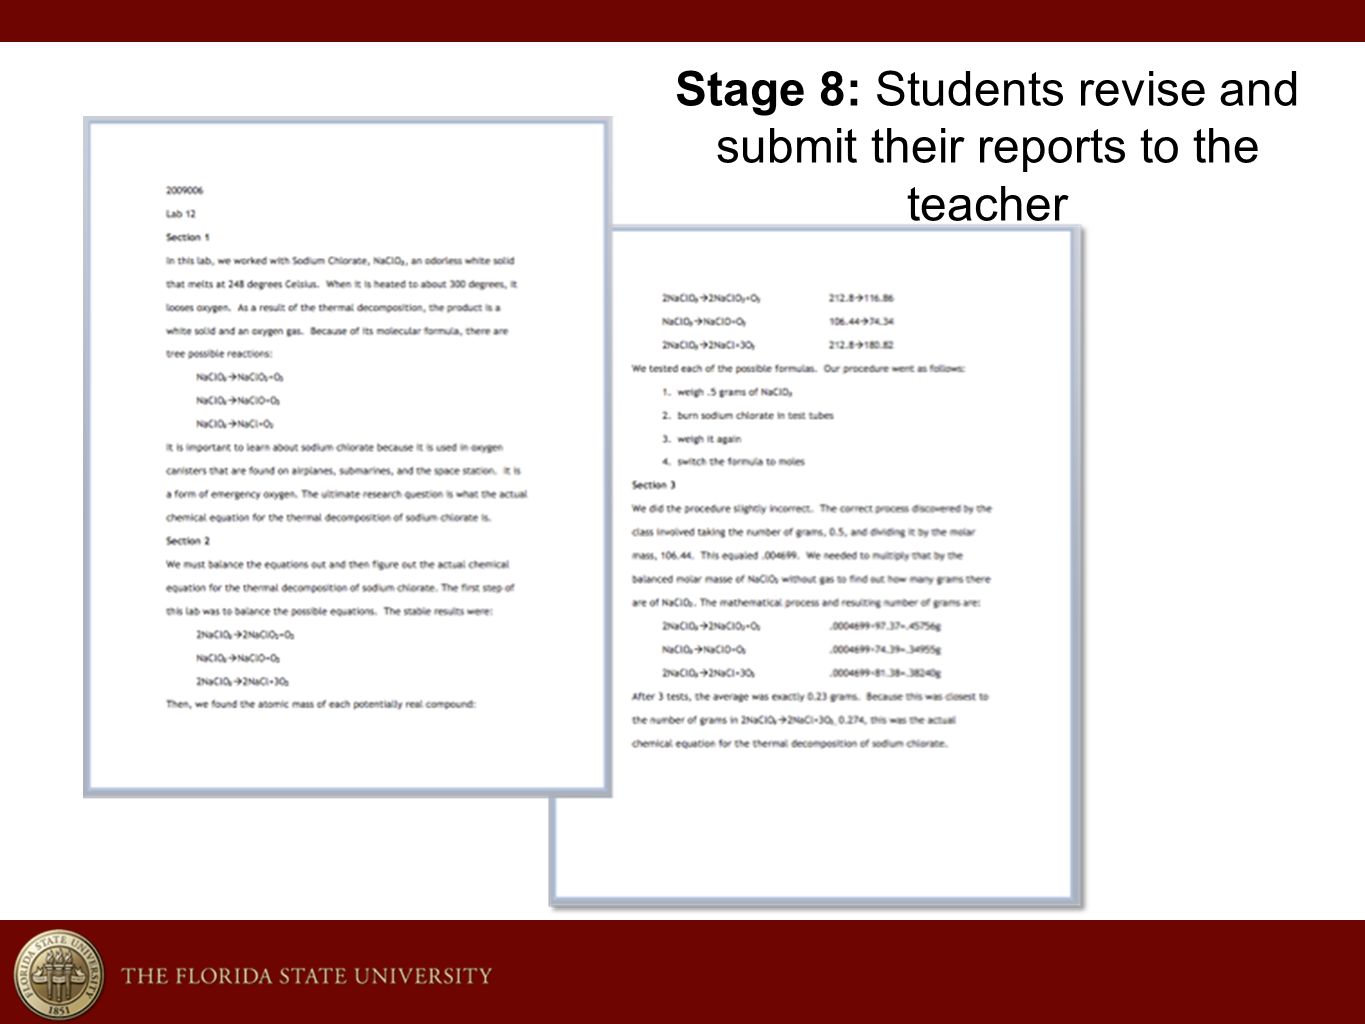 Stage 8: Students revise and submit their reports to the teacher